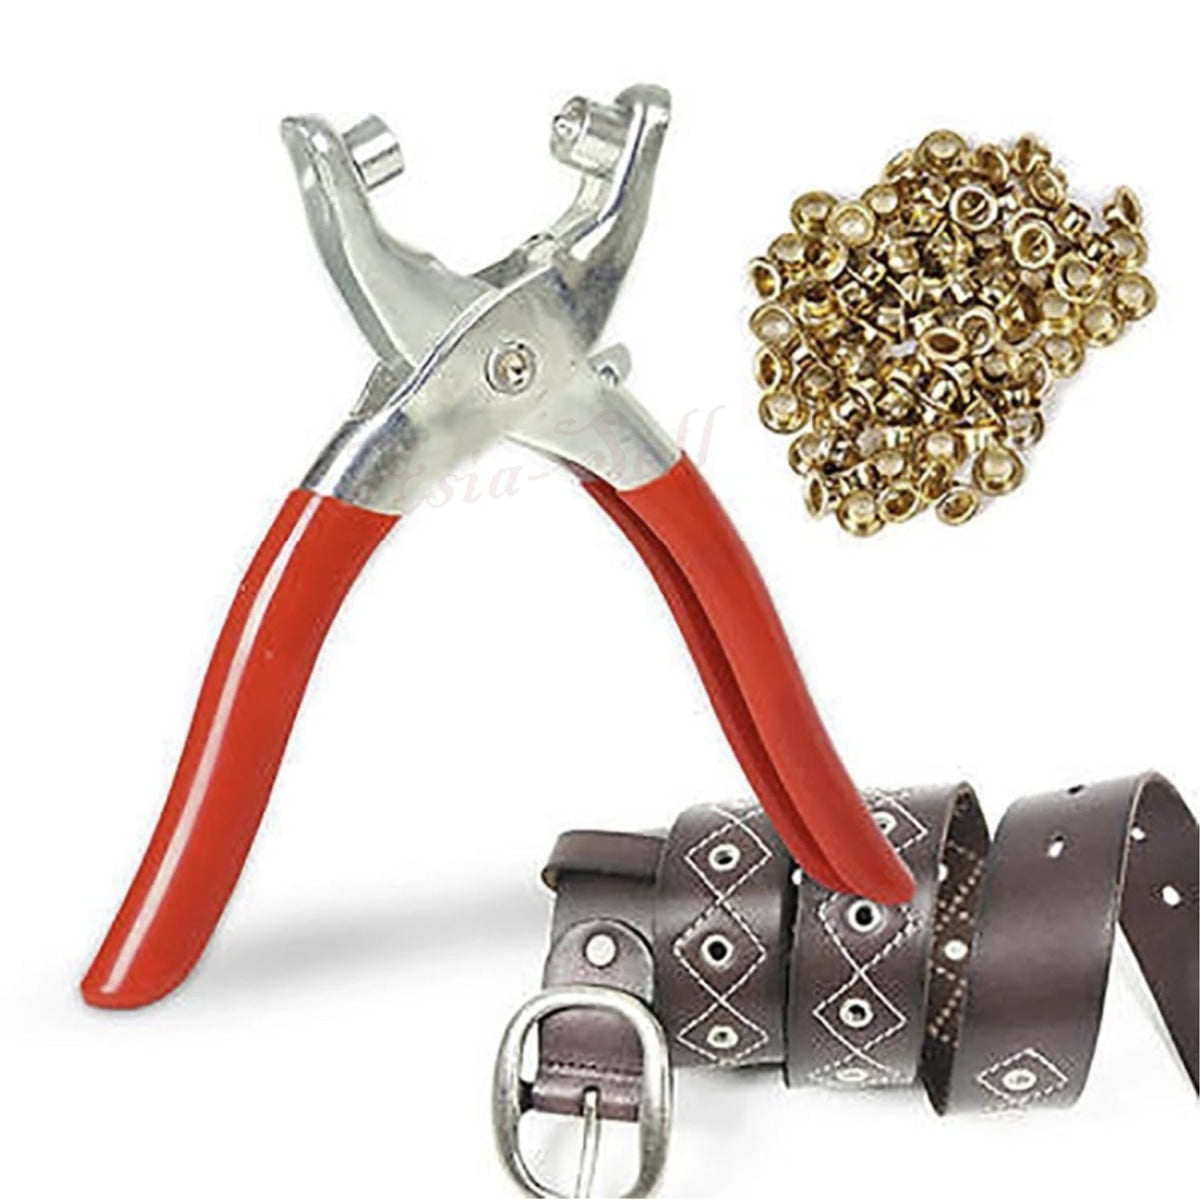 1X Punch Pliers 100 Rivets Eyelets Tools Grommets For Shoes Bags Leather Belt Crimping Hand Eyelet